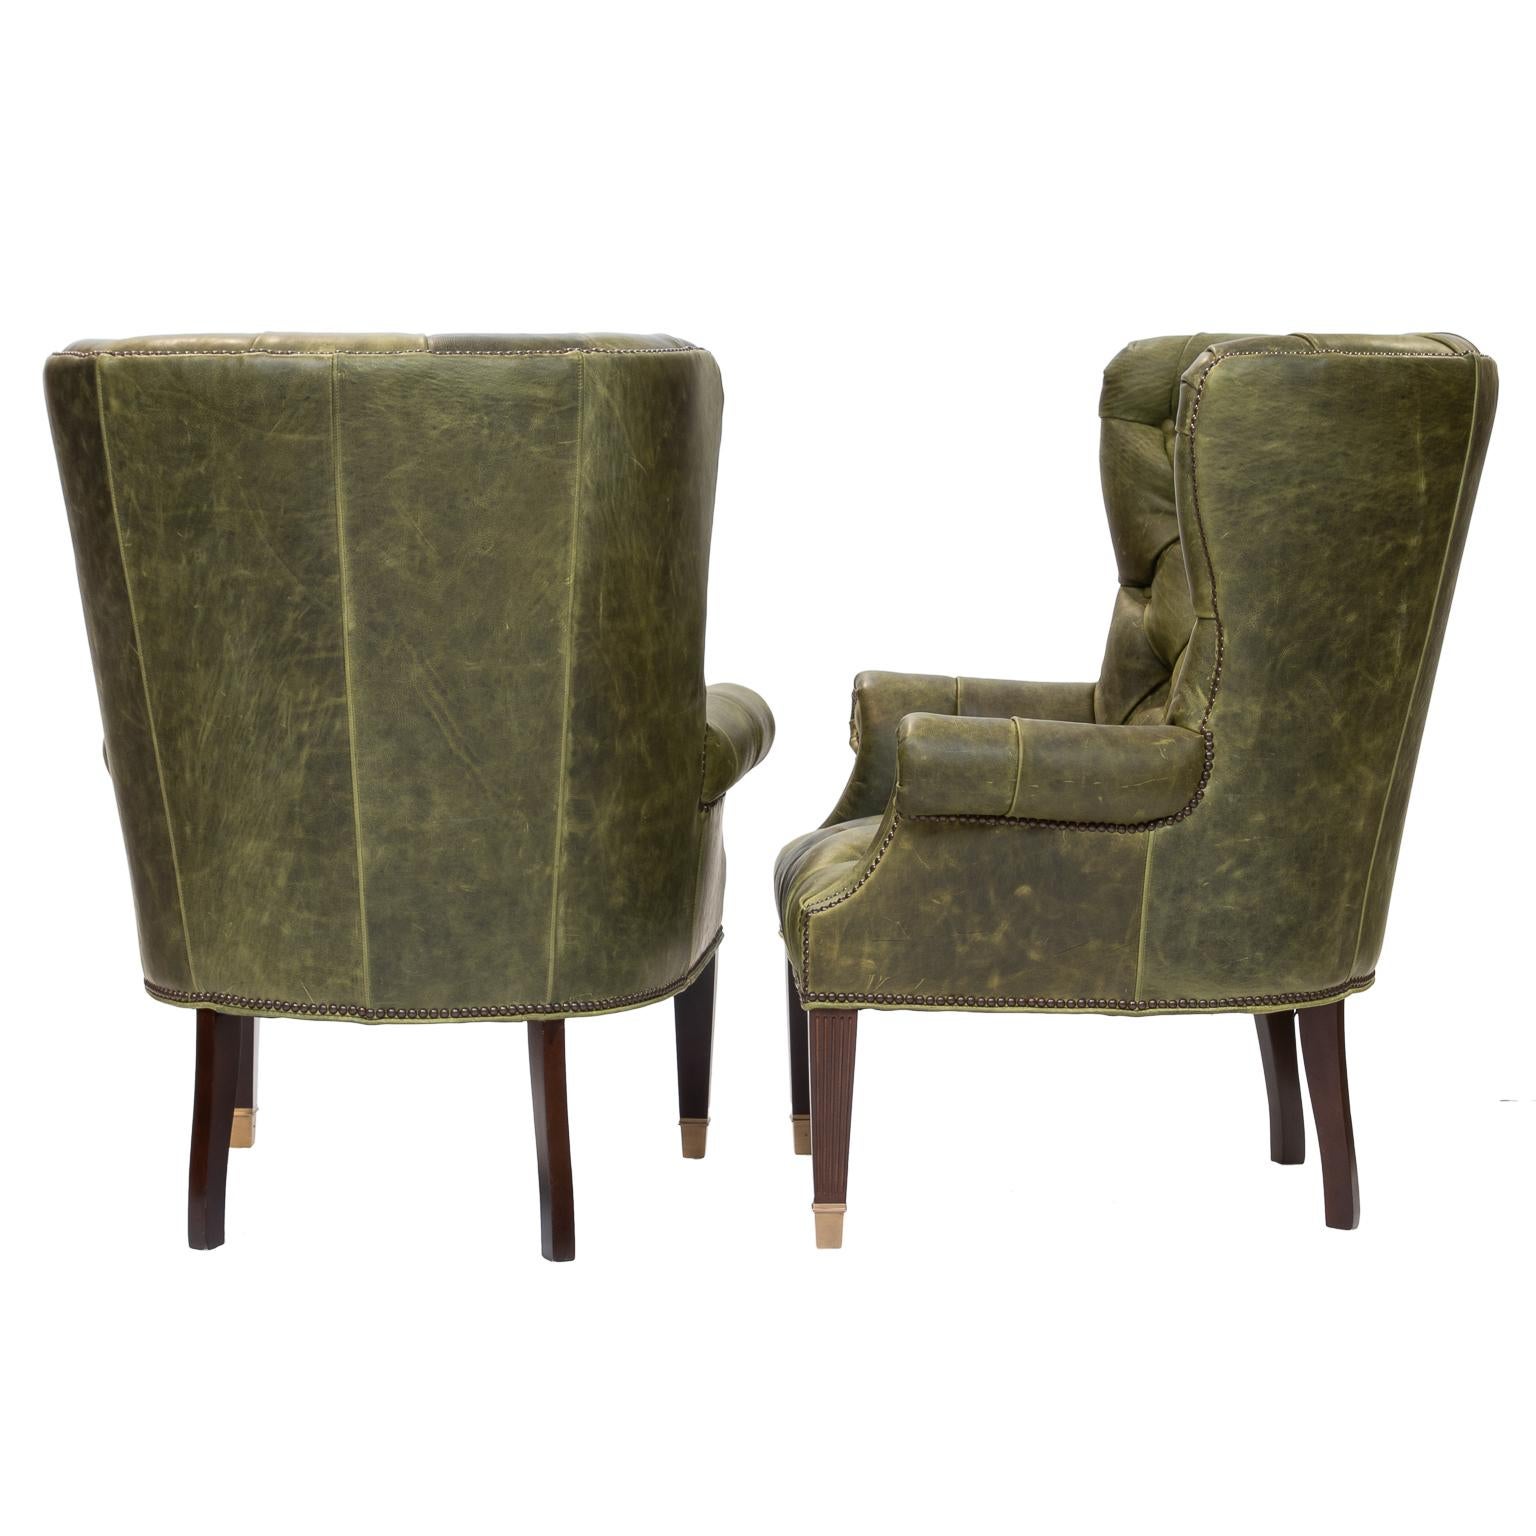 A superb pair of leather tufted wing chairs. Resting on mahogany legs with brass caps.